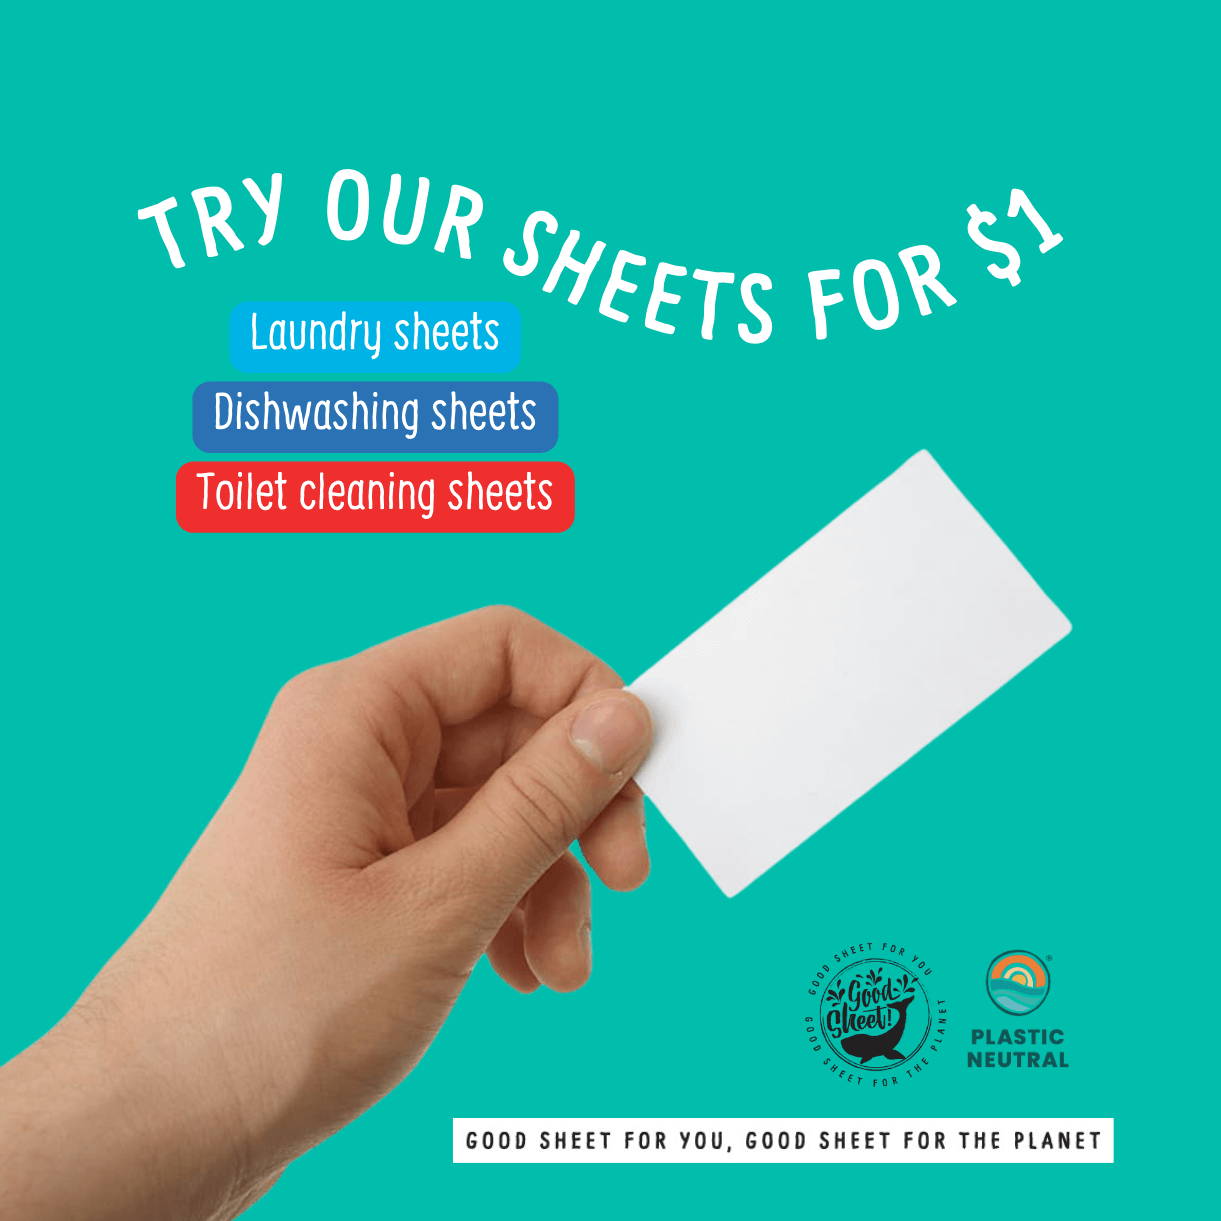 Try our sheets for 1 dollar only